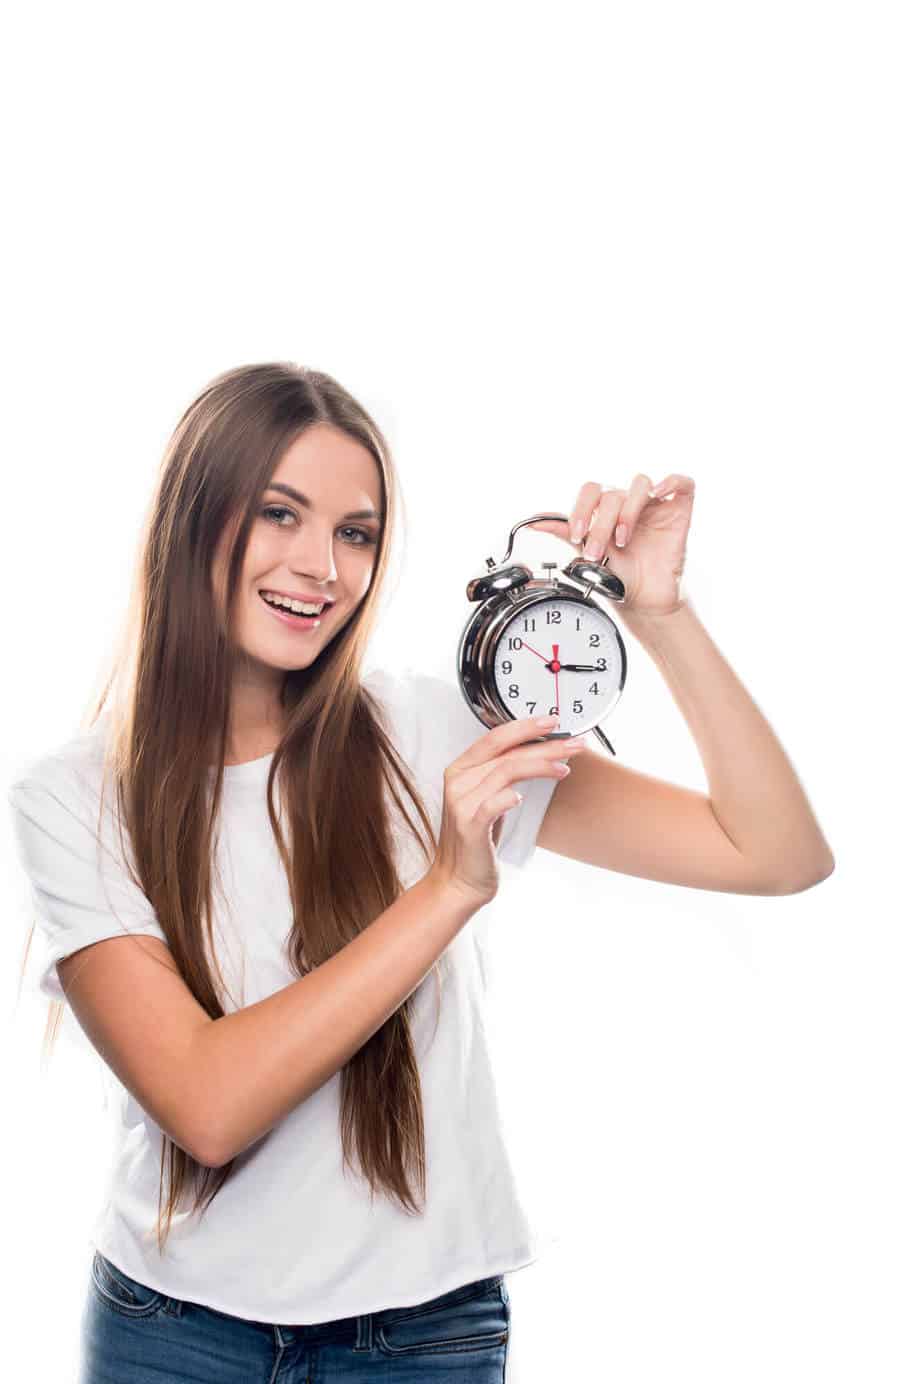 Woman holding a clock.  Check your intermittent fasting window to make sure you're fasting long enough for results.  